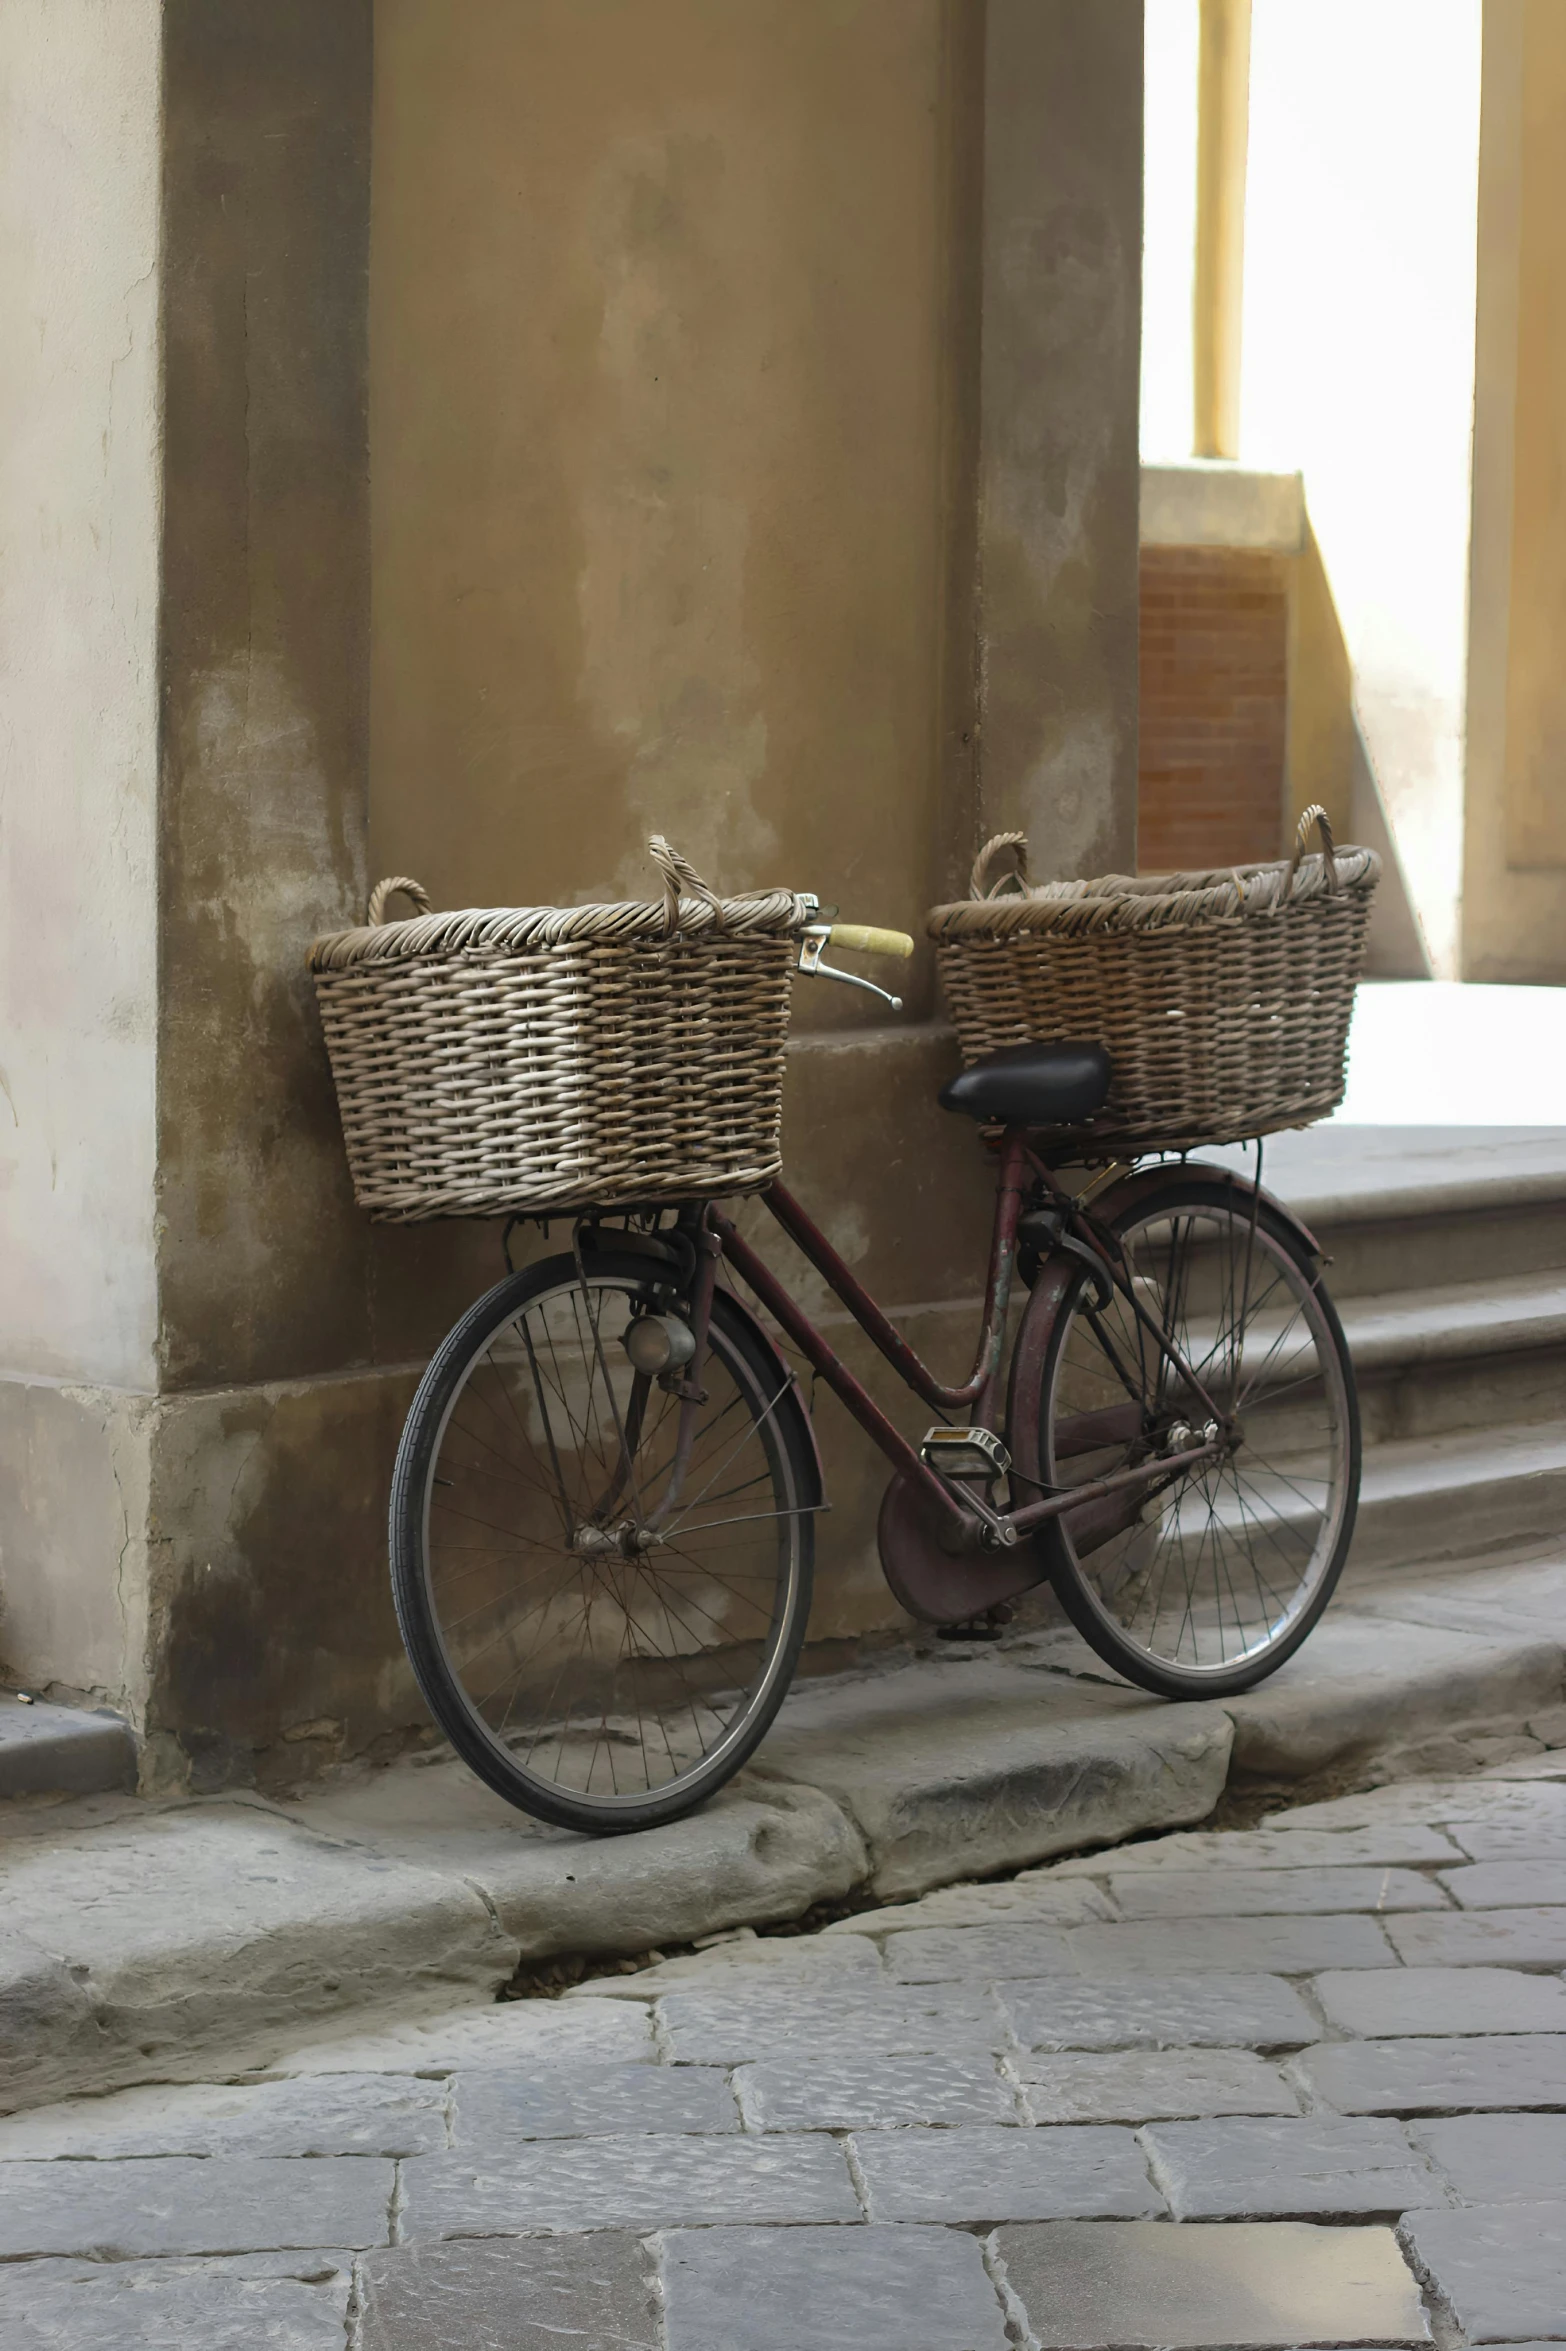 there is a bike with two baskets attached